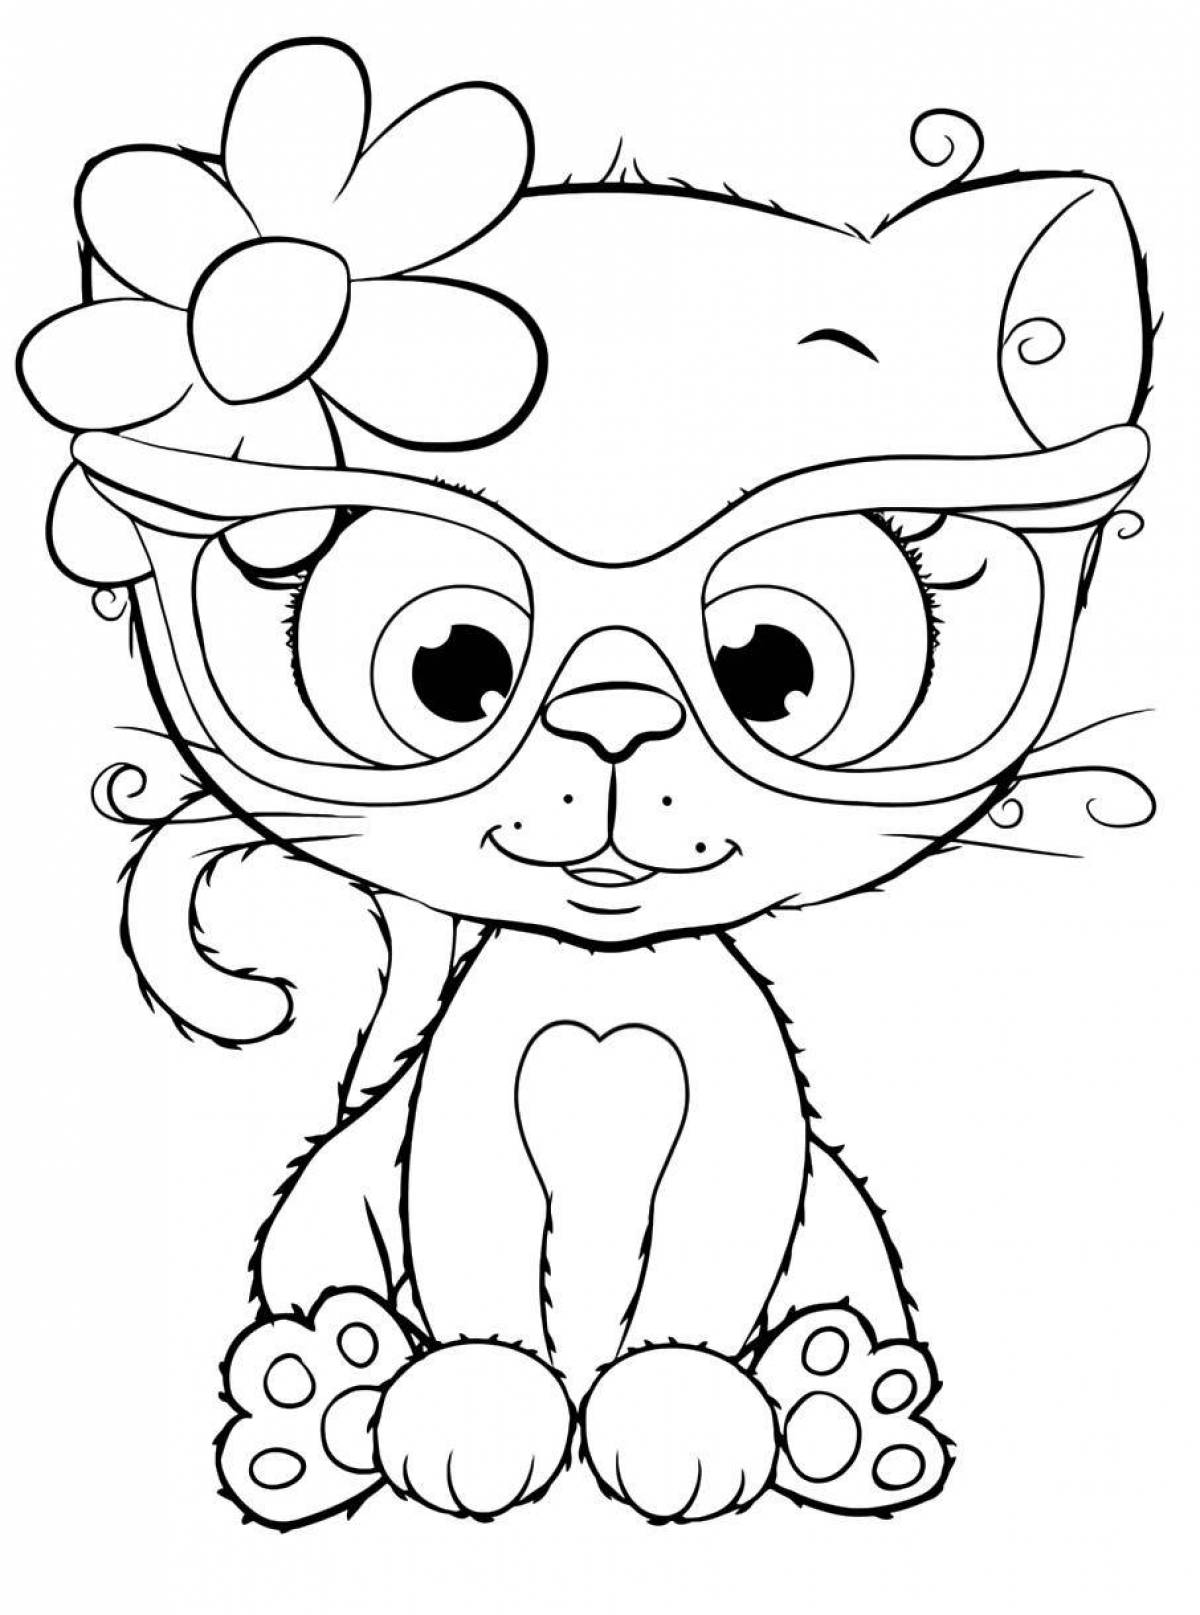 Cute mrr meow coloring page